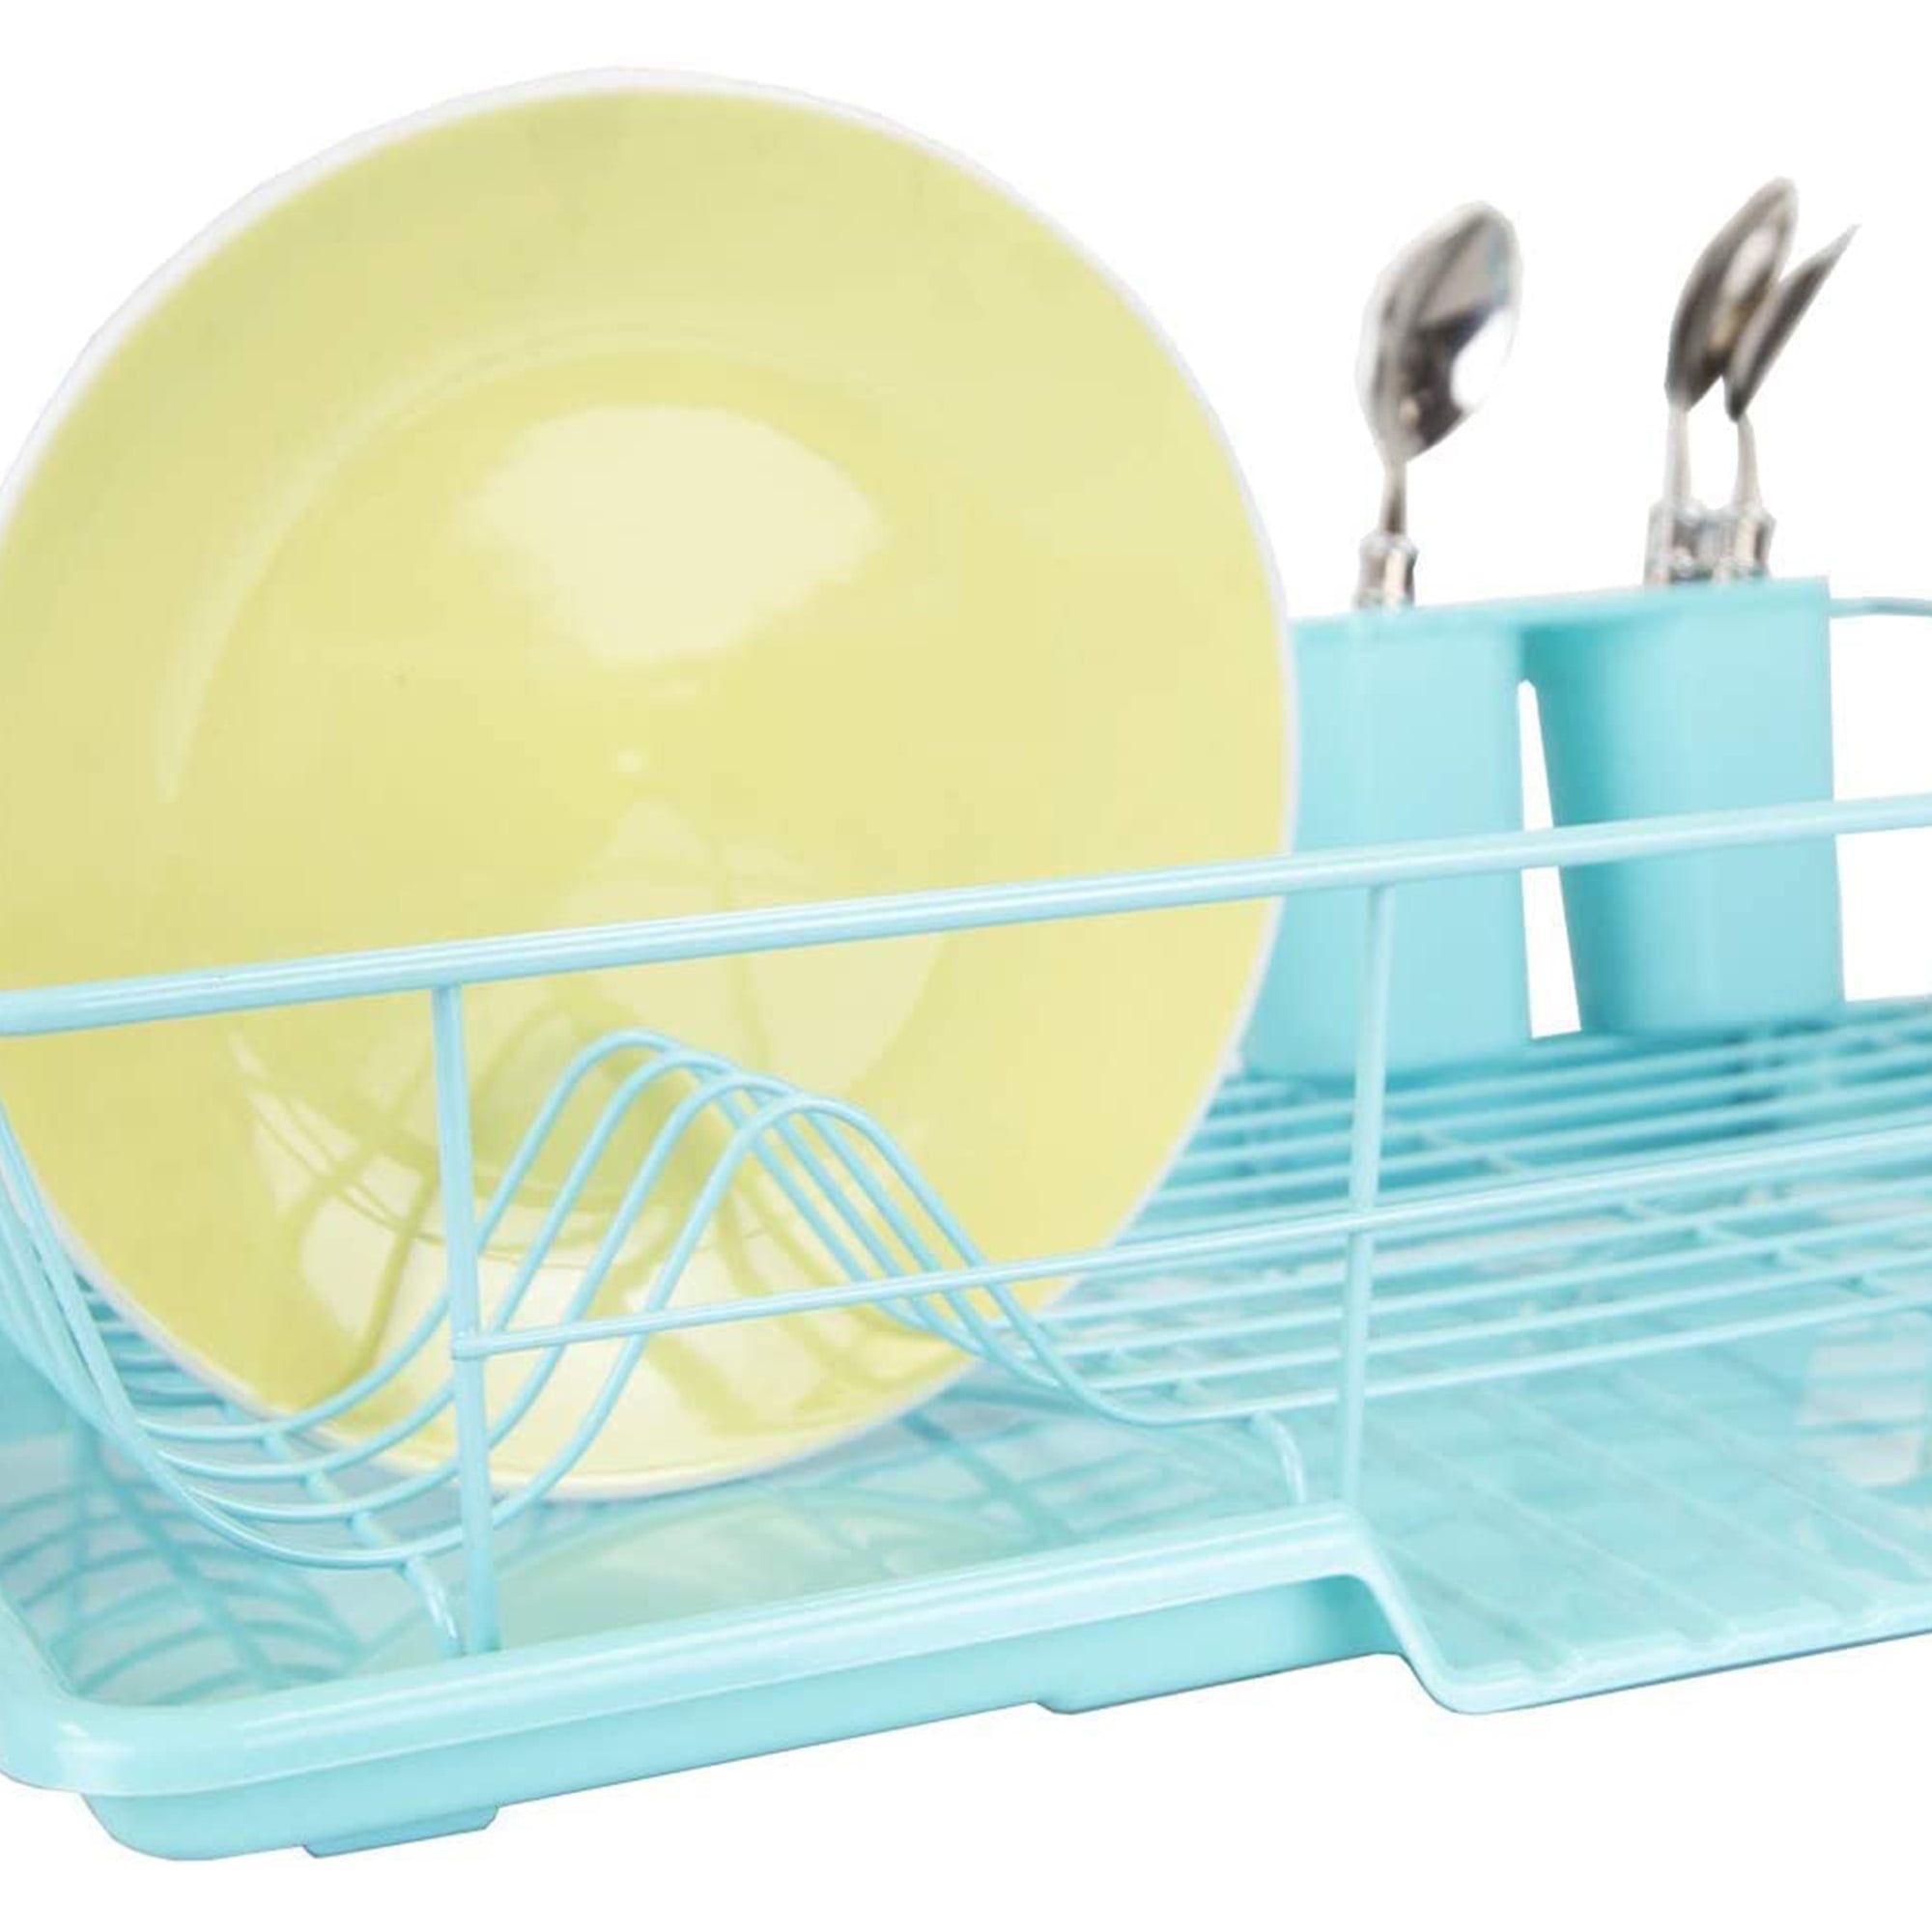 JOEY'Z Extra Large Silver 3 Piece Dish Rack Sink Set with Removable  Drainboard & Utensil Holder - Heavy Duty Coated Wire - 19 x 12 x 5